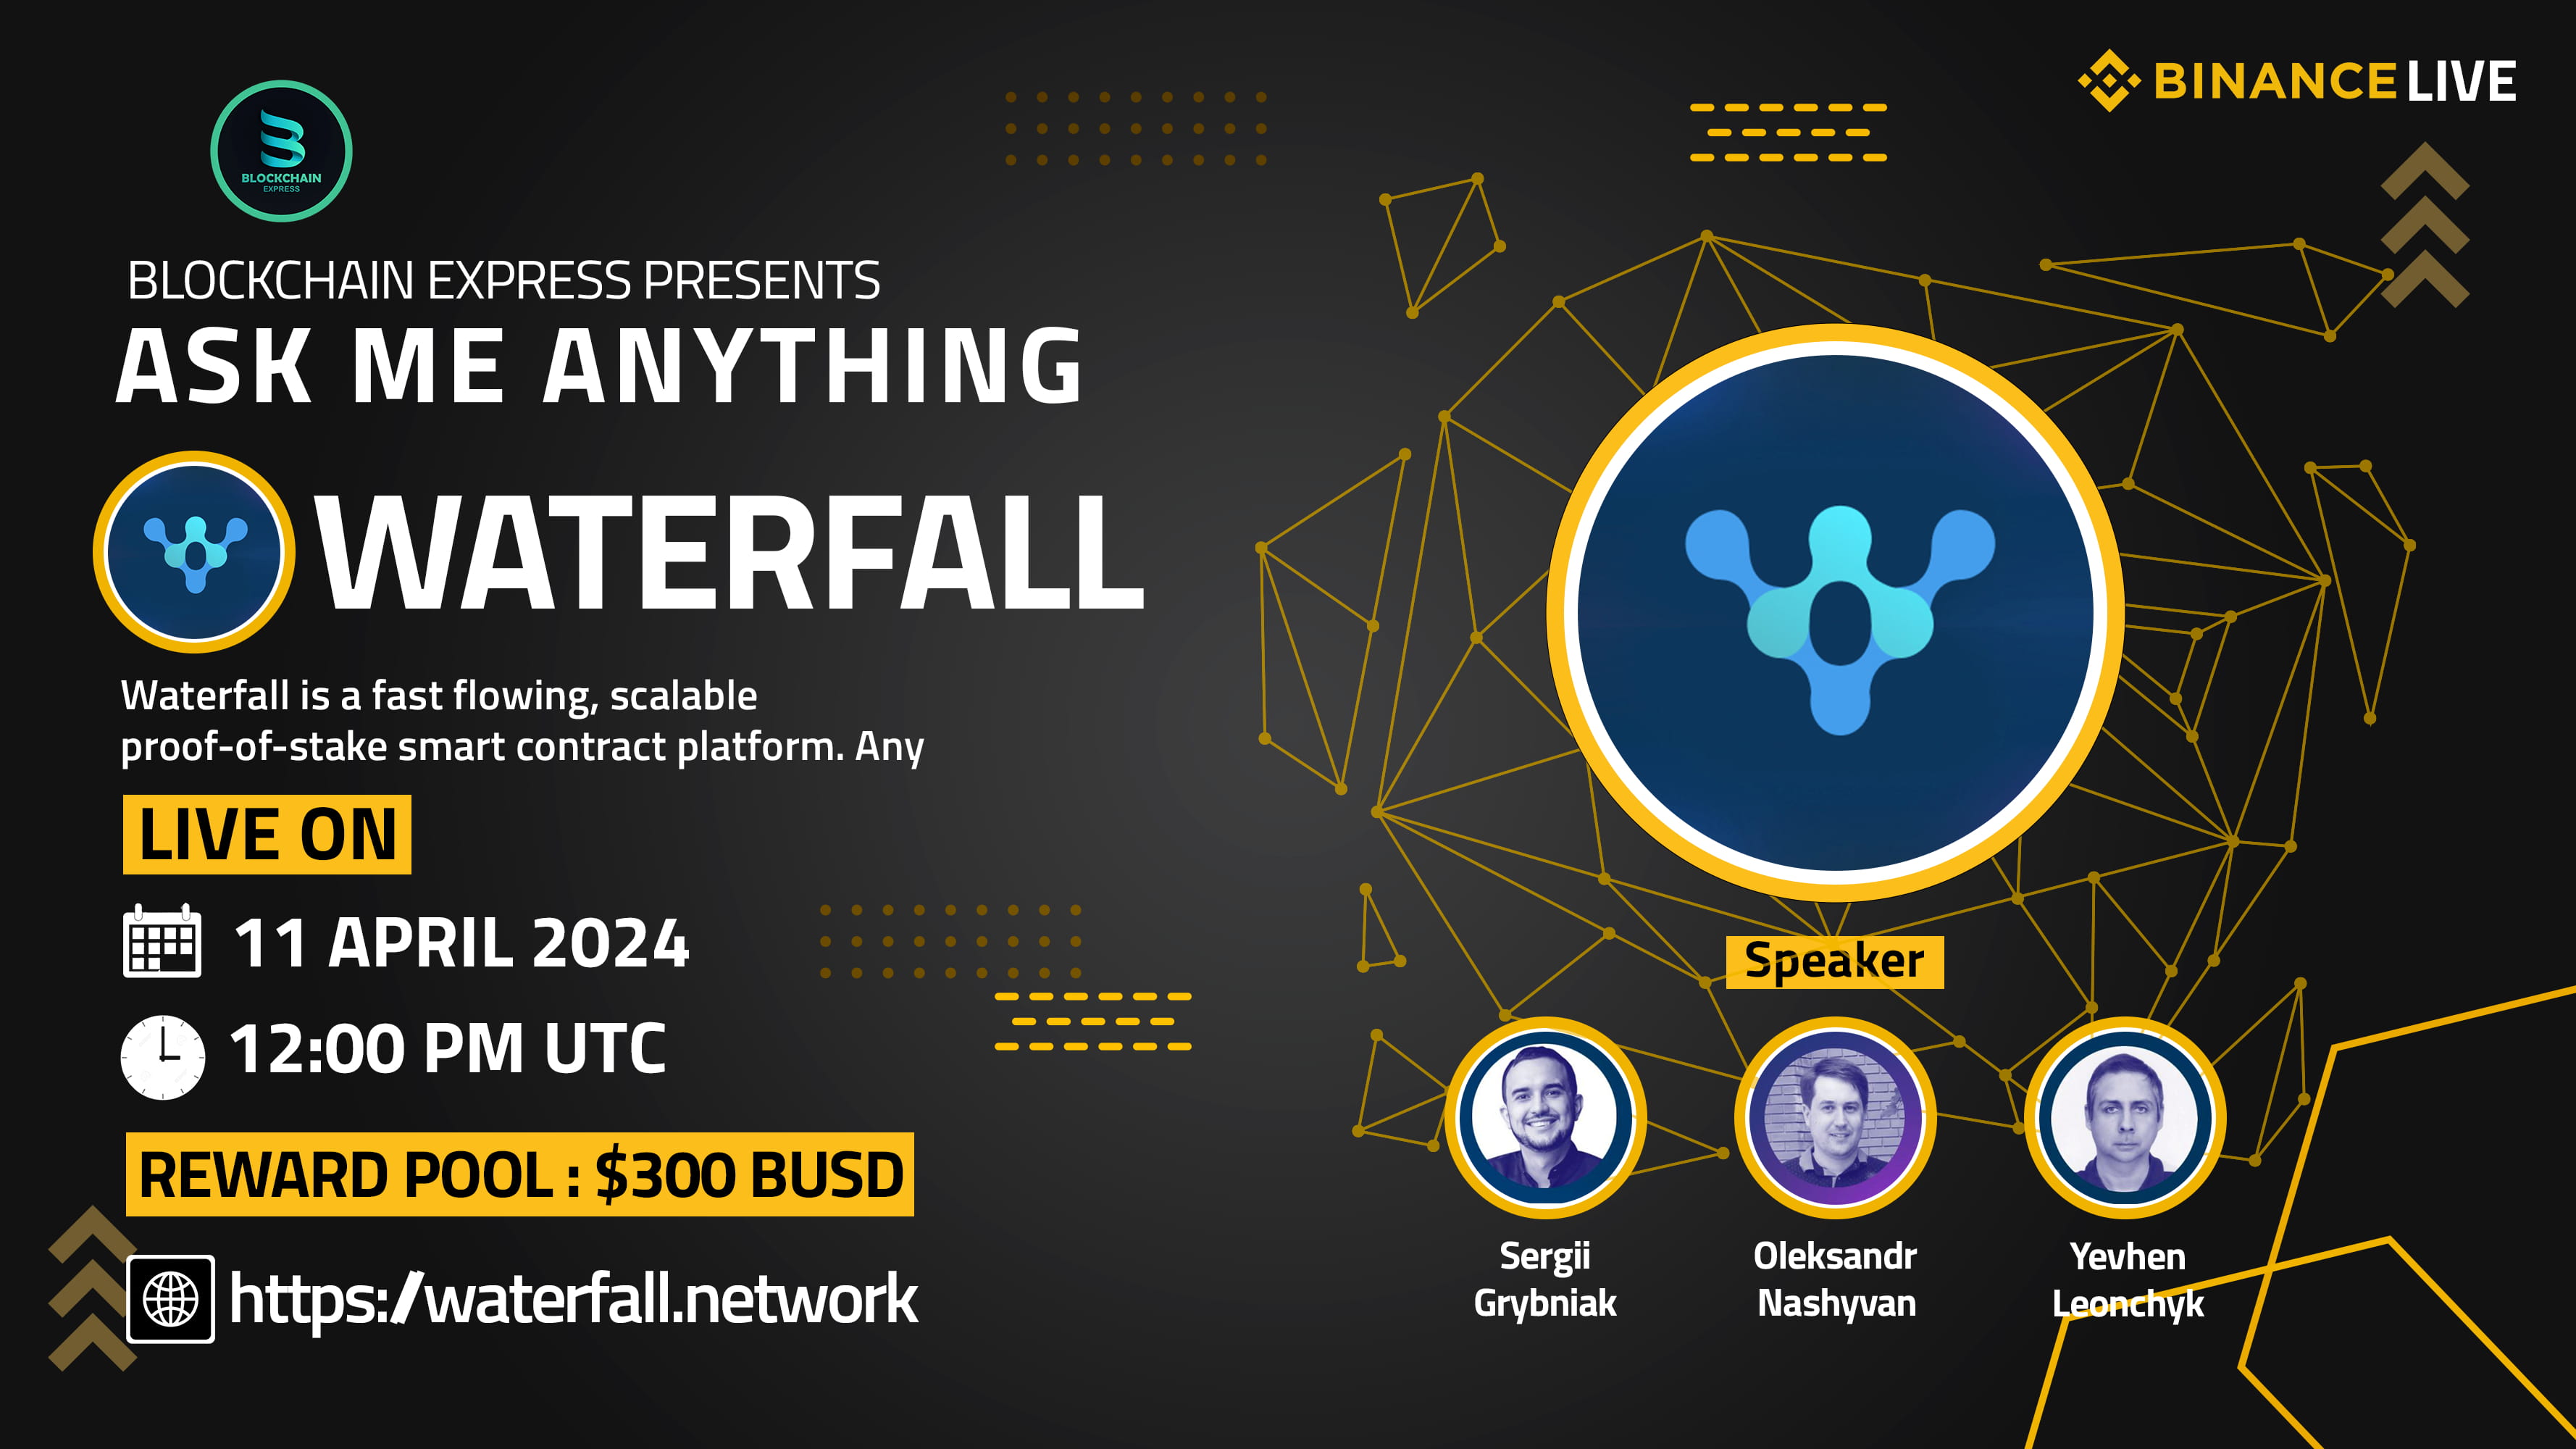 ₿lockchain Express will be hosting an AMA session with" Waterfall "